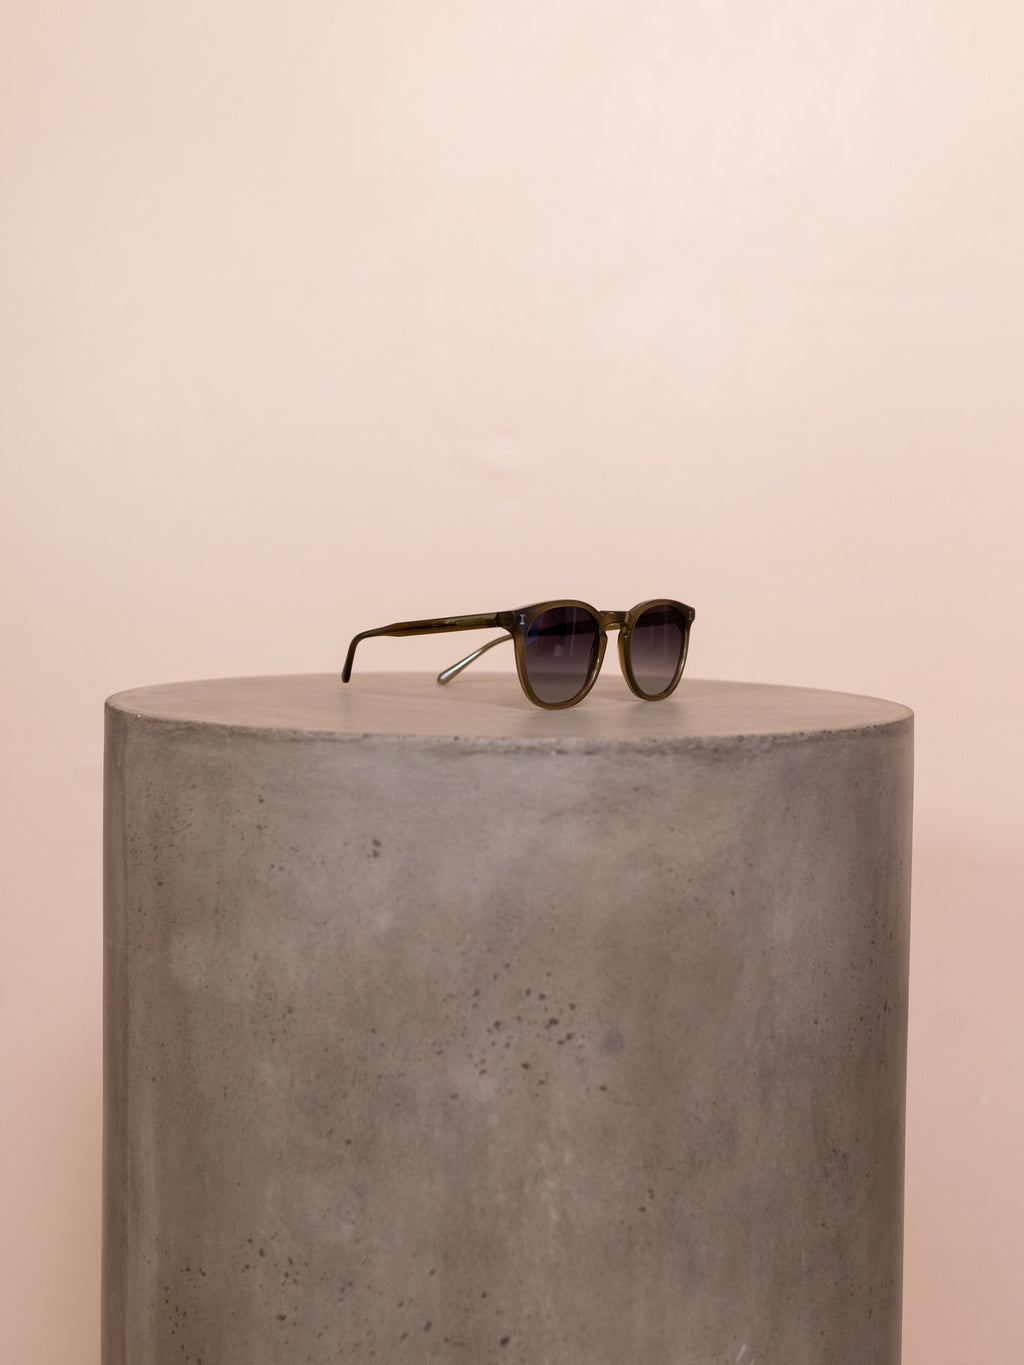 Green round sunglasses on pedestal against pink background.